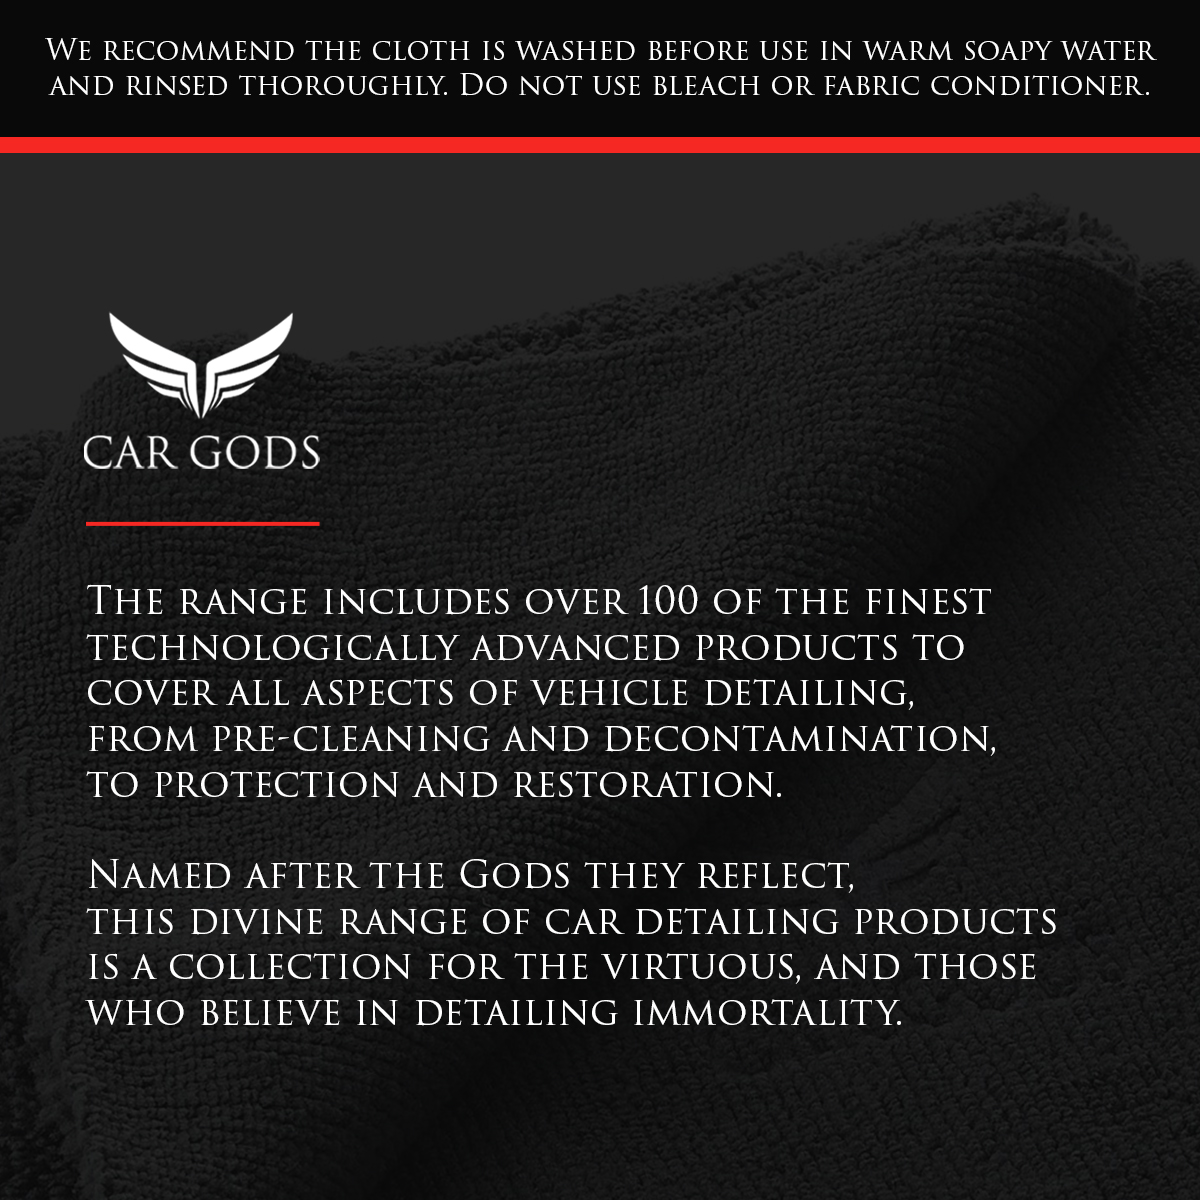 We recommend the cloth is washed before use in warm soapy water and rinsed thoroughly. Do not use bleach or fabric conditioner. The Car Gods range includes over 100 of the finest technologically advanced products to cover all aspects of vehicle detailing, from pre-cleaning and decontamination, to protection and restoration. Named after the Gods they reflect, this divine range of car detailing products is a collection for the virtuous, and those who believe in detailing immortality.